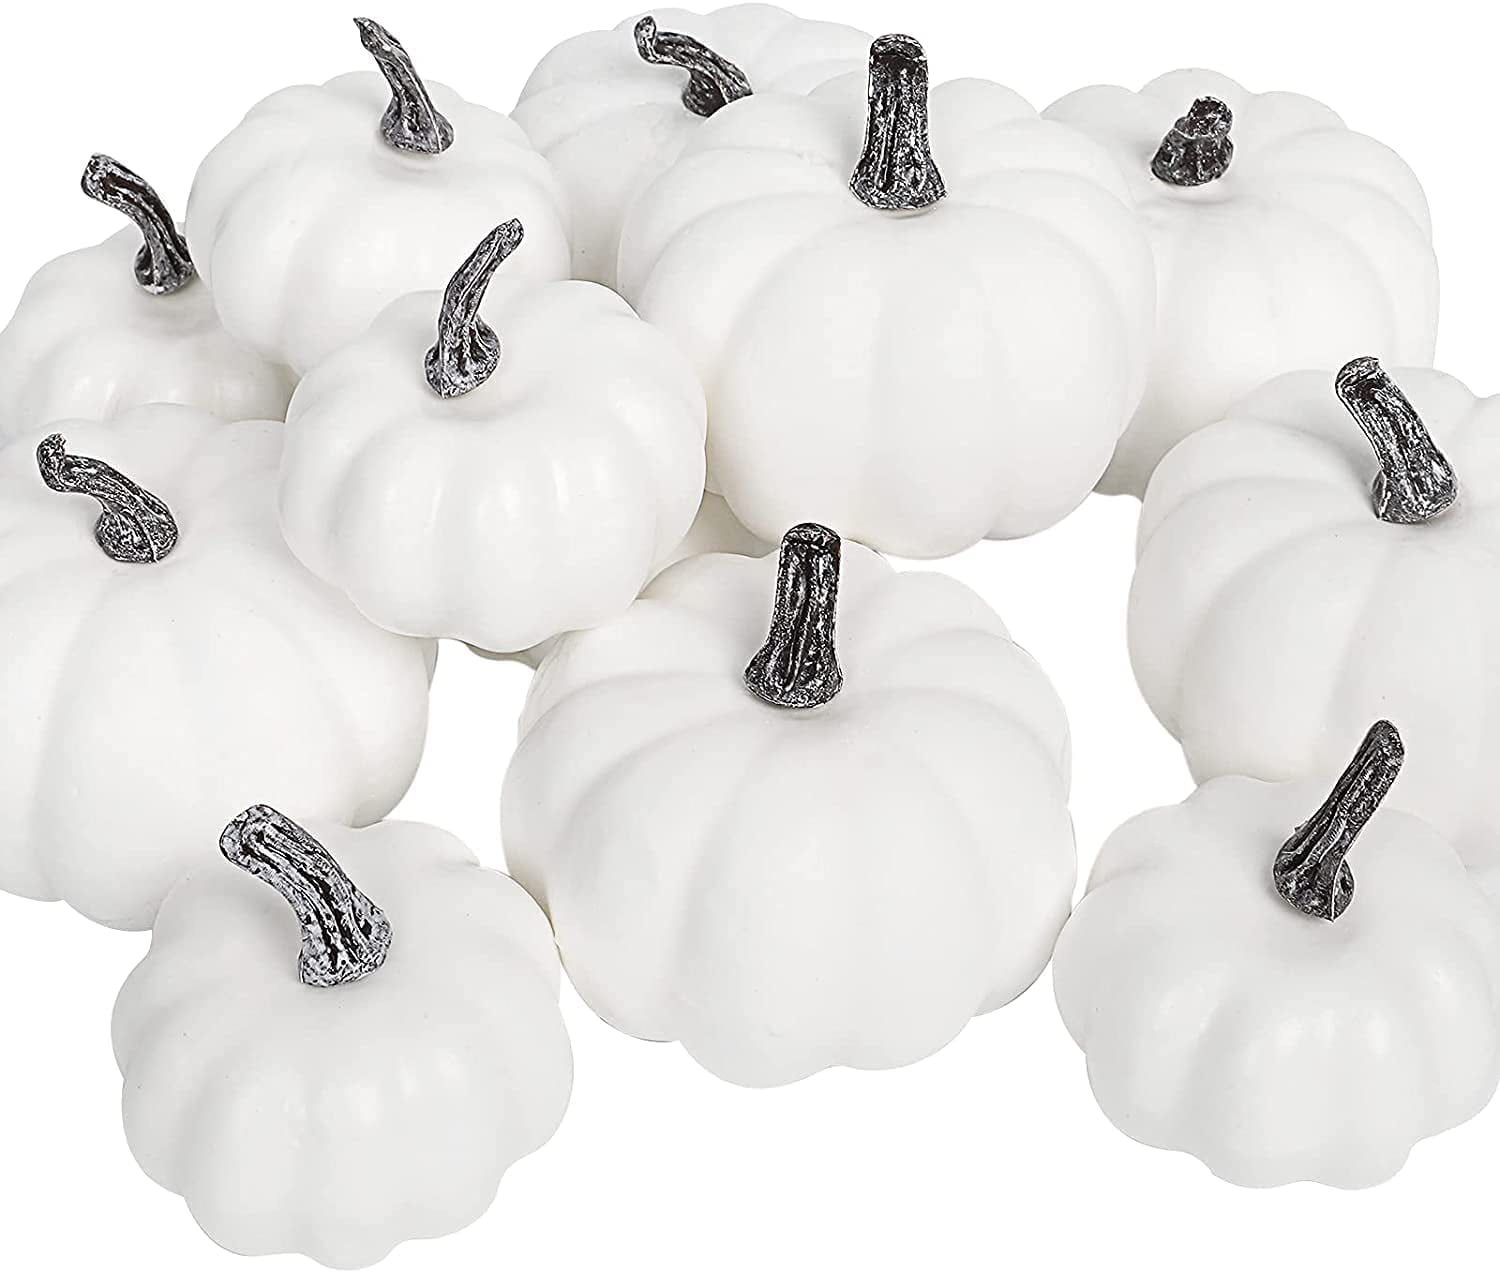 12PCS Artificial Creamy White Pumpkins Decoration for Autumn and Thanksgiving